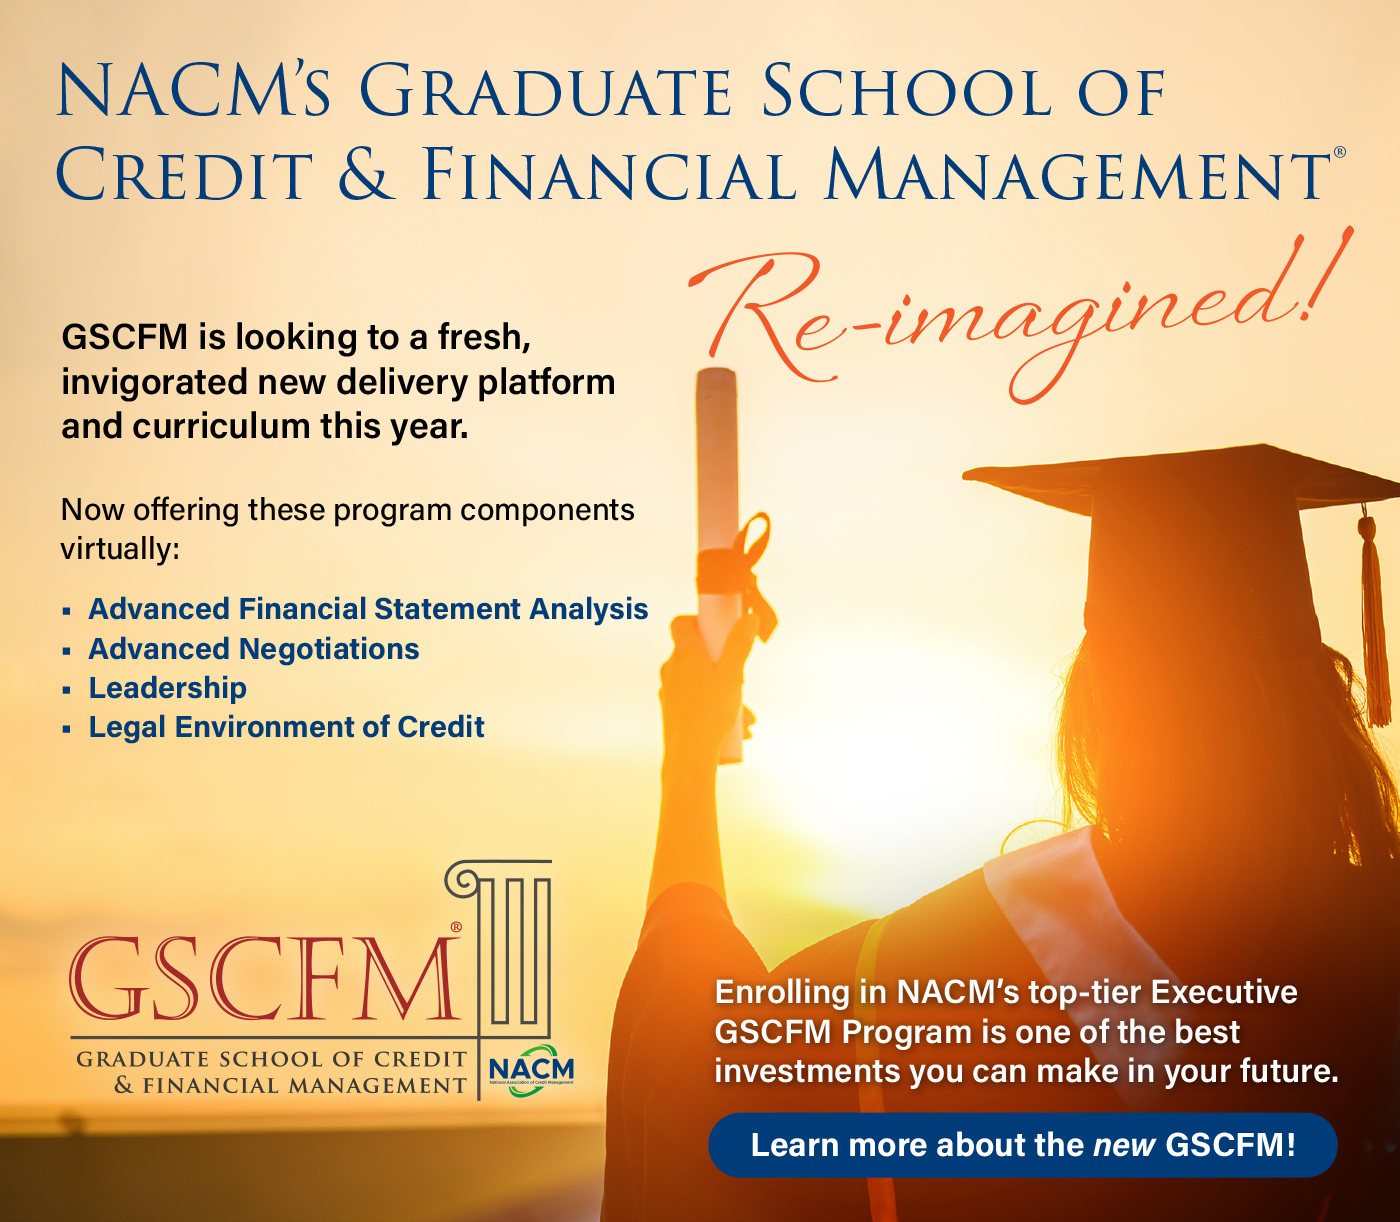 NACM's Graduate School of Credit & Financial Management - Re-imagined - Learn More Today!